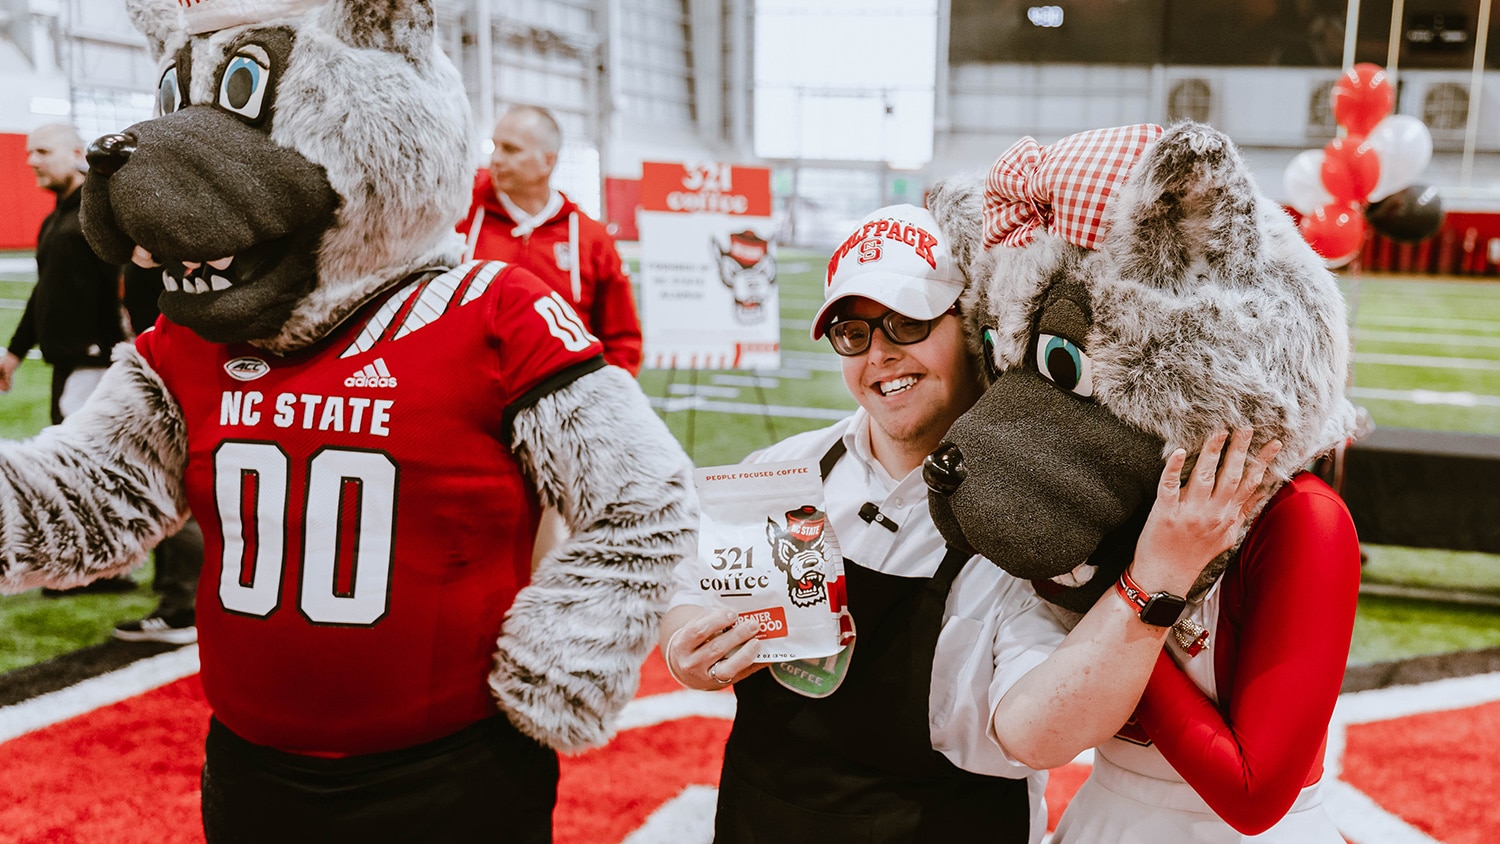 Sam, a 321 Coffee employee, hugs Ms. Wuf while holding a bag of the company's new NC State co-branded Greater Good coffee.